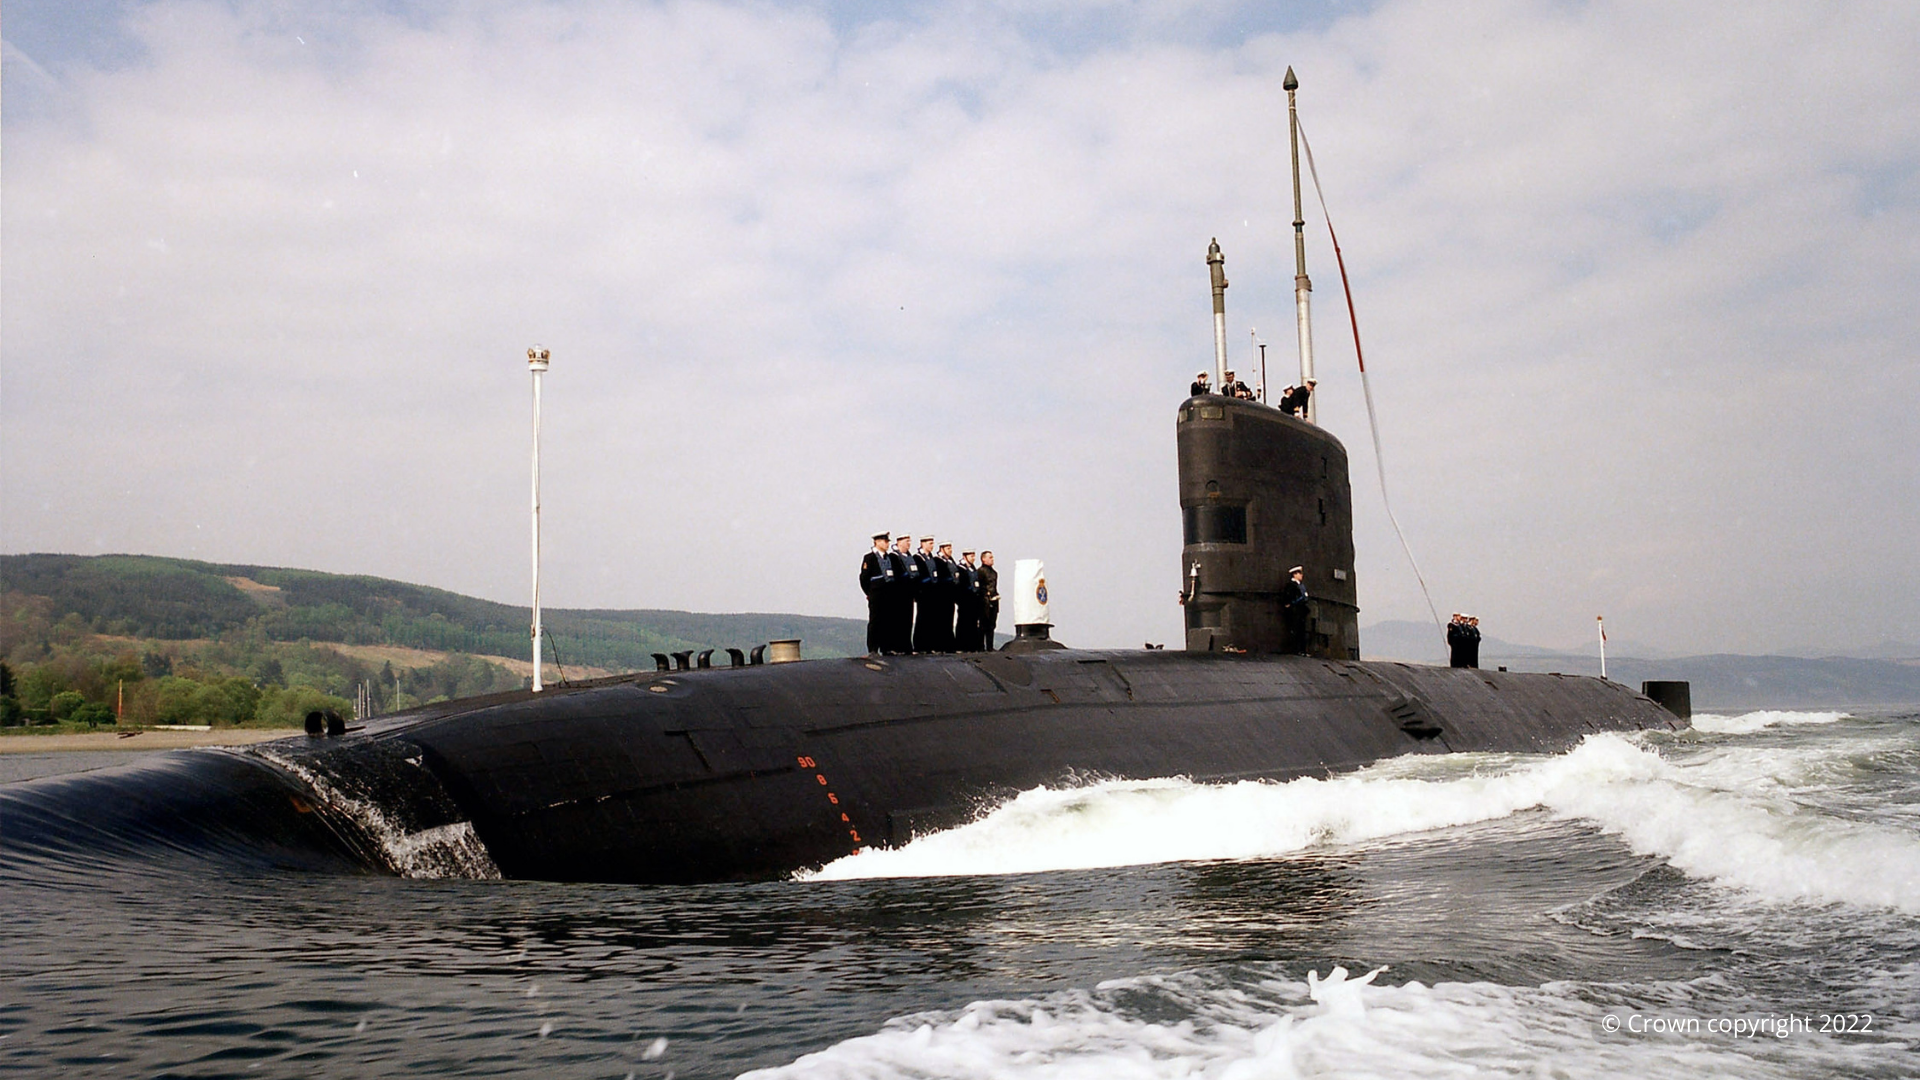 UK to award contract for nuclear sub dismantling in 2023